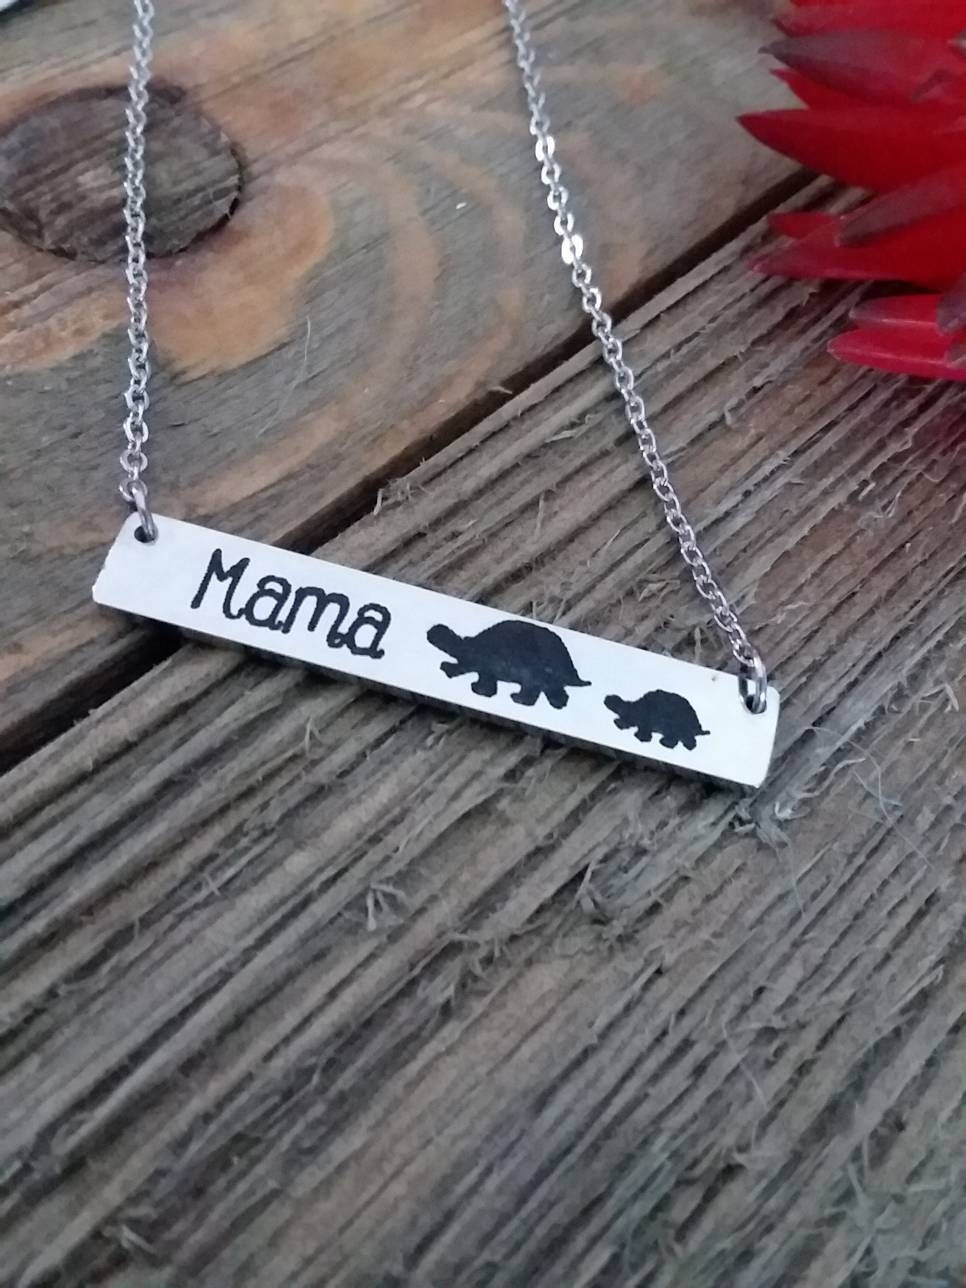 Mama Turtle Necklace turtle mom jewelry mommy turtle mother | Etsy